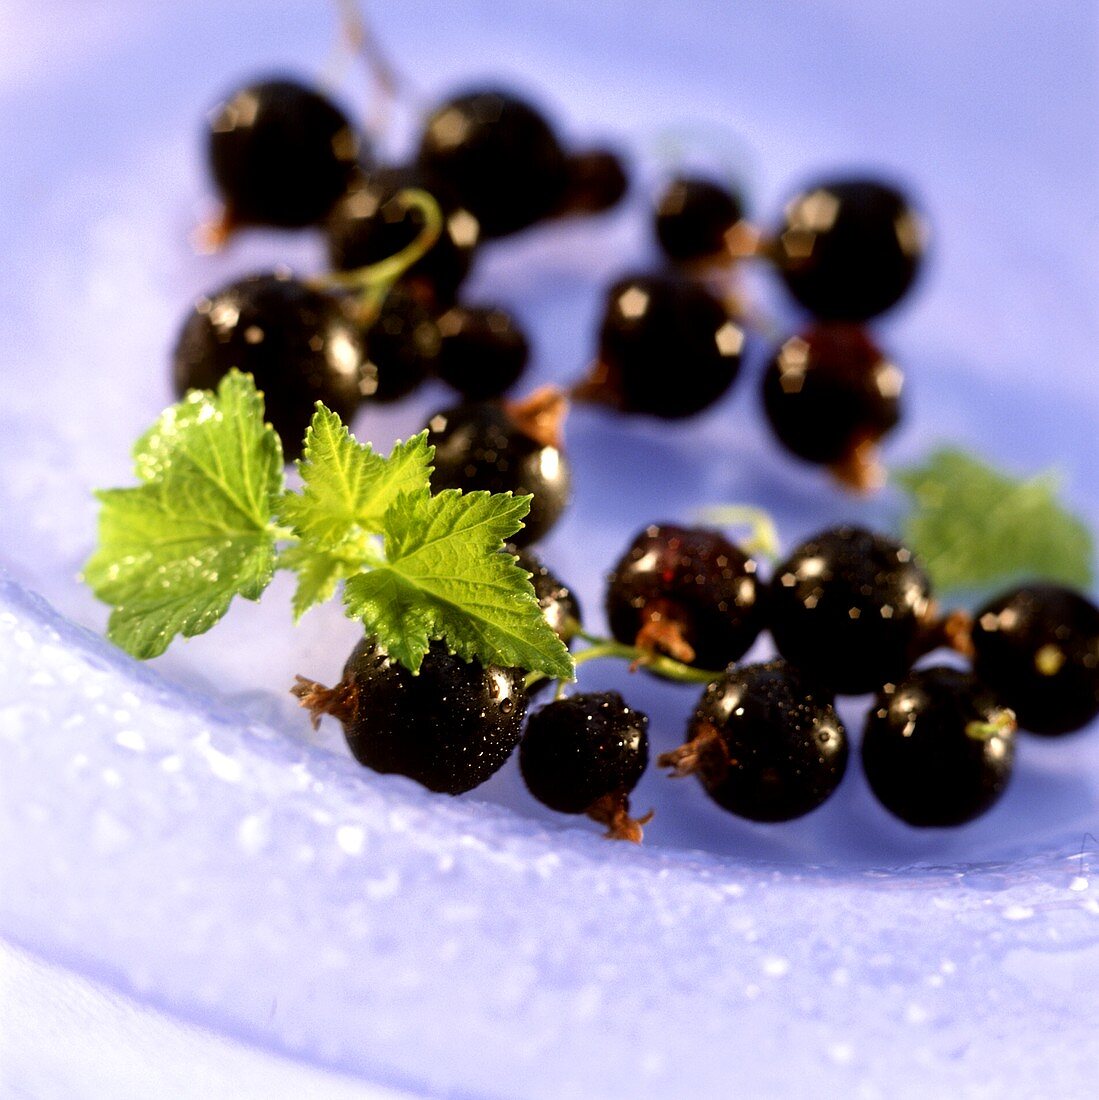 Blackcurrants with leaves on plate